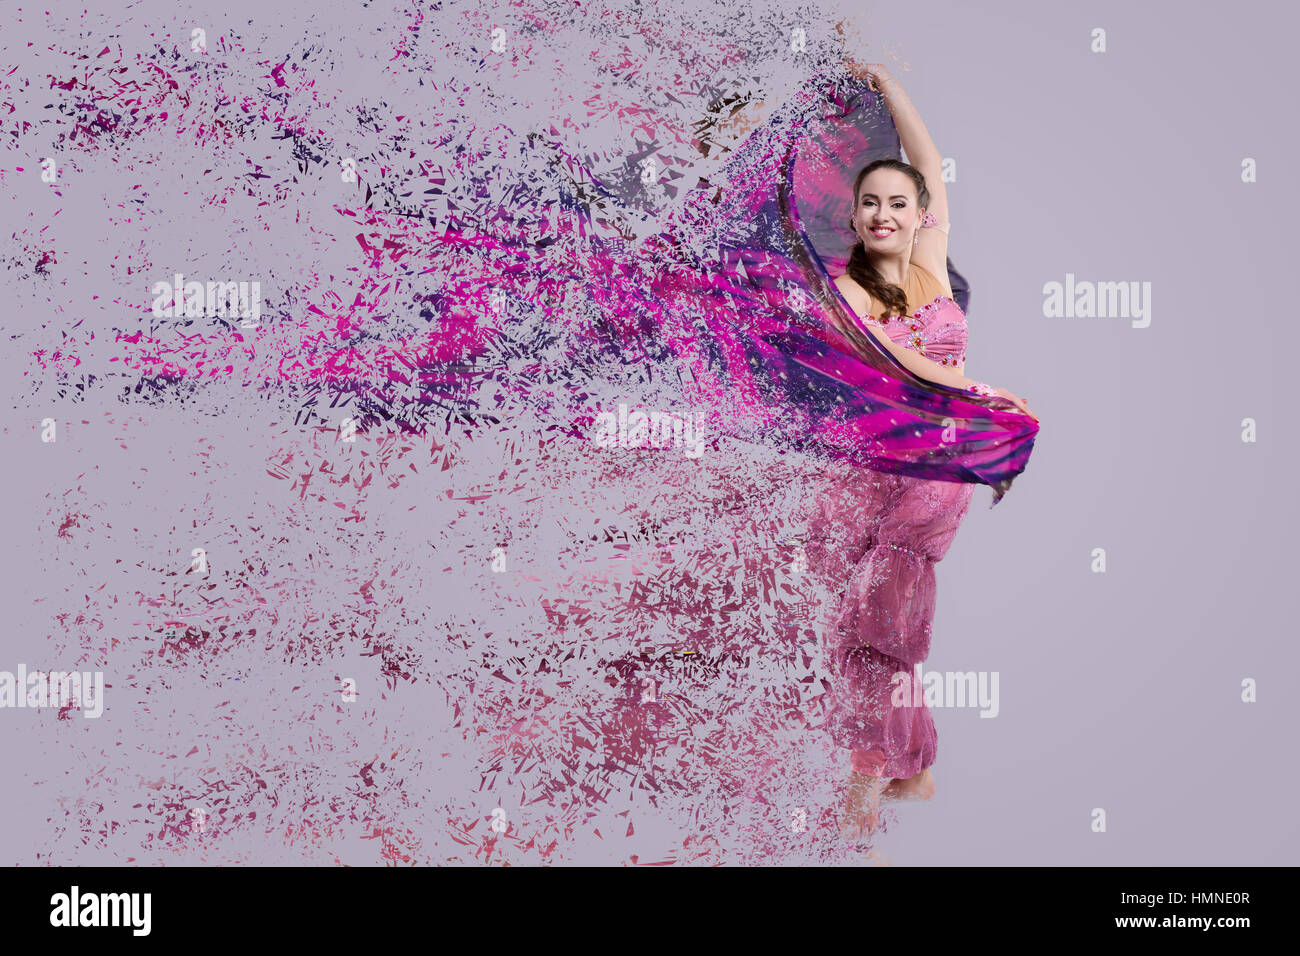 Dancer with disintegrating scarf. Abstract vision.Photo manipulation Stock Photo